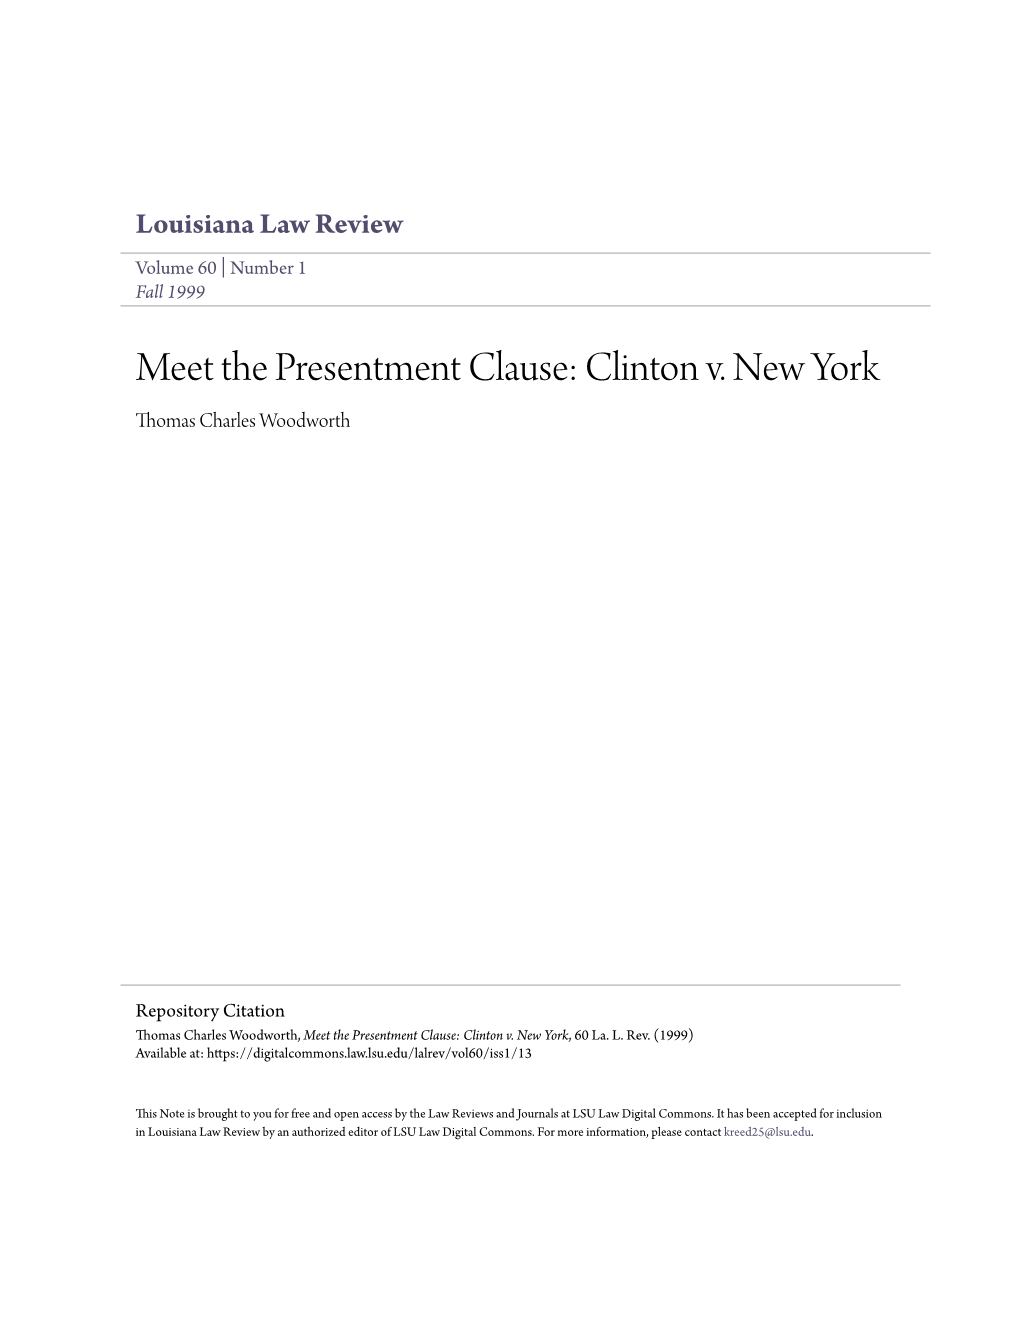 Meet the Presentment Clause: Clinton V. New York Thomas Charles Woodworth